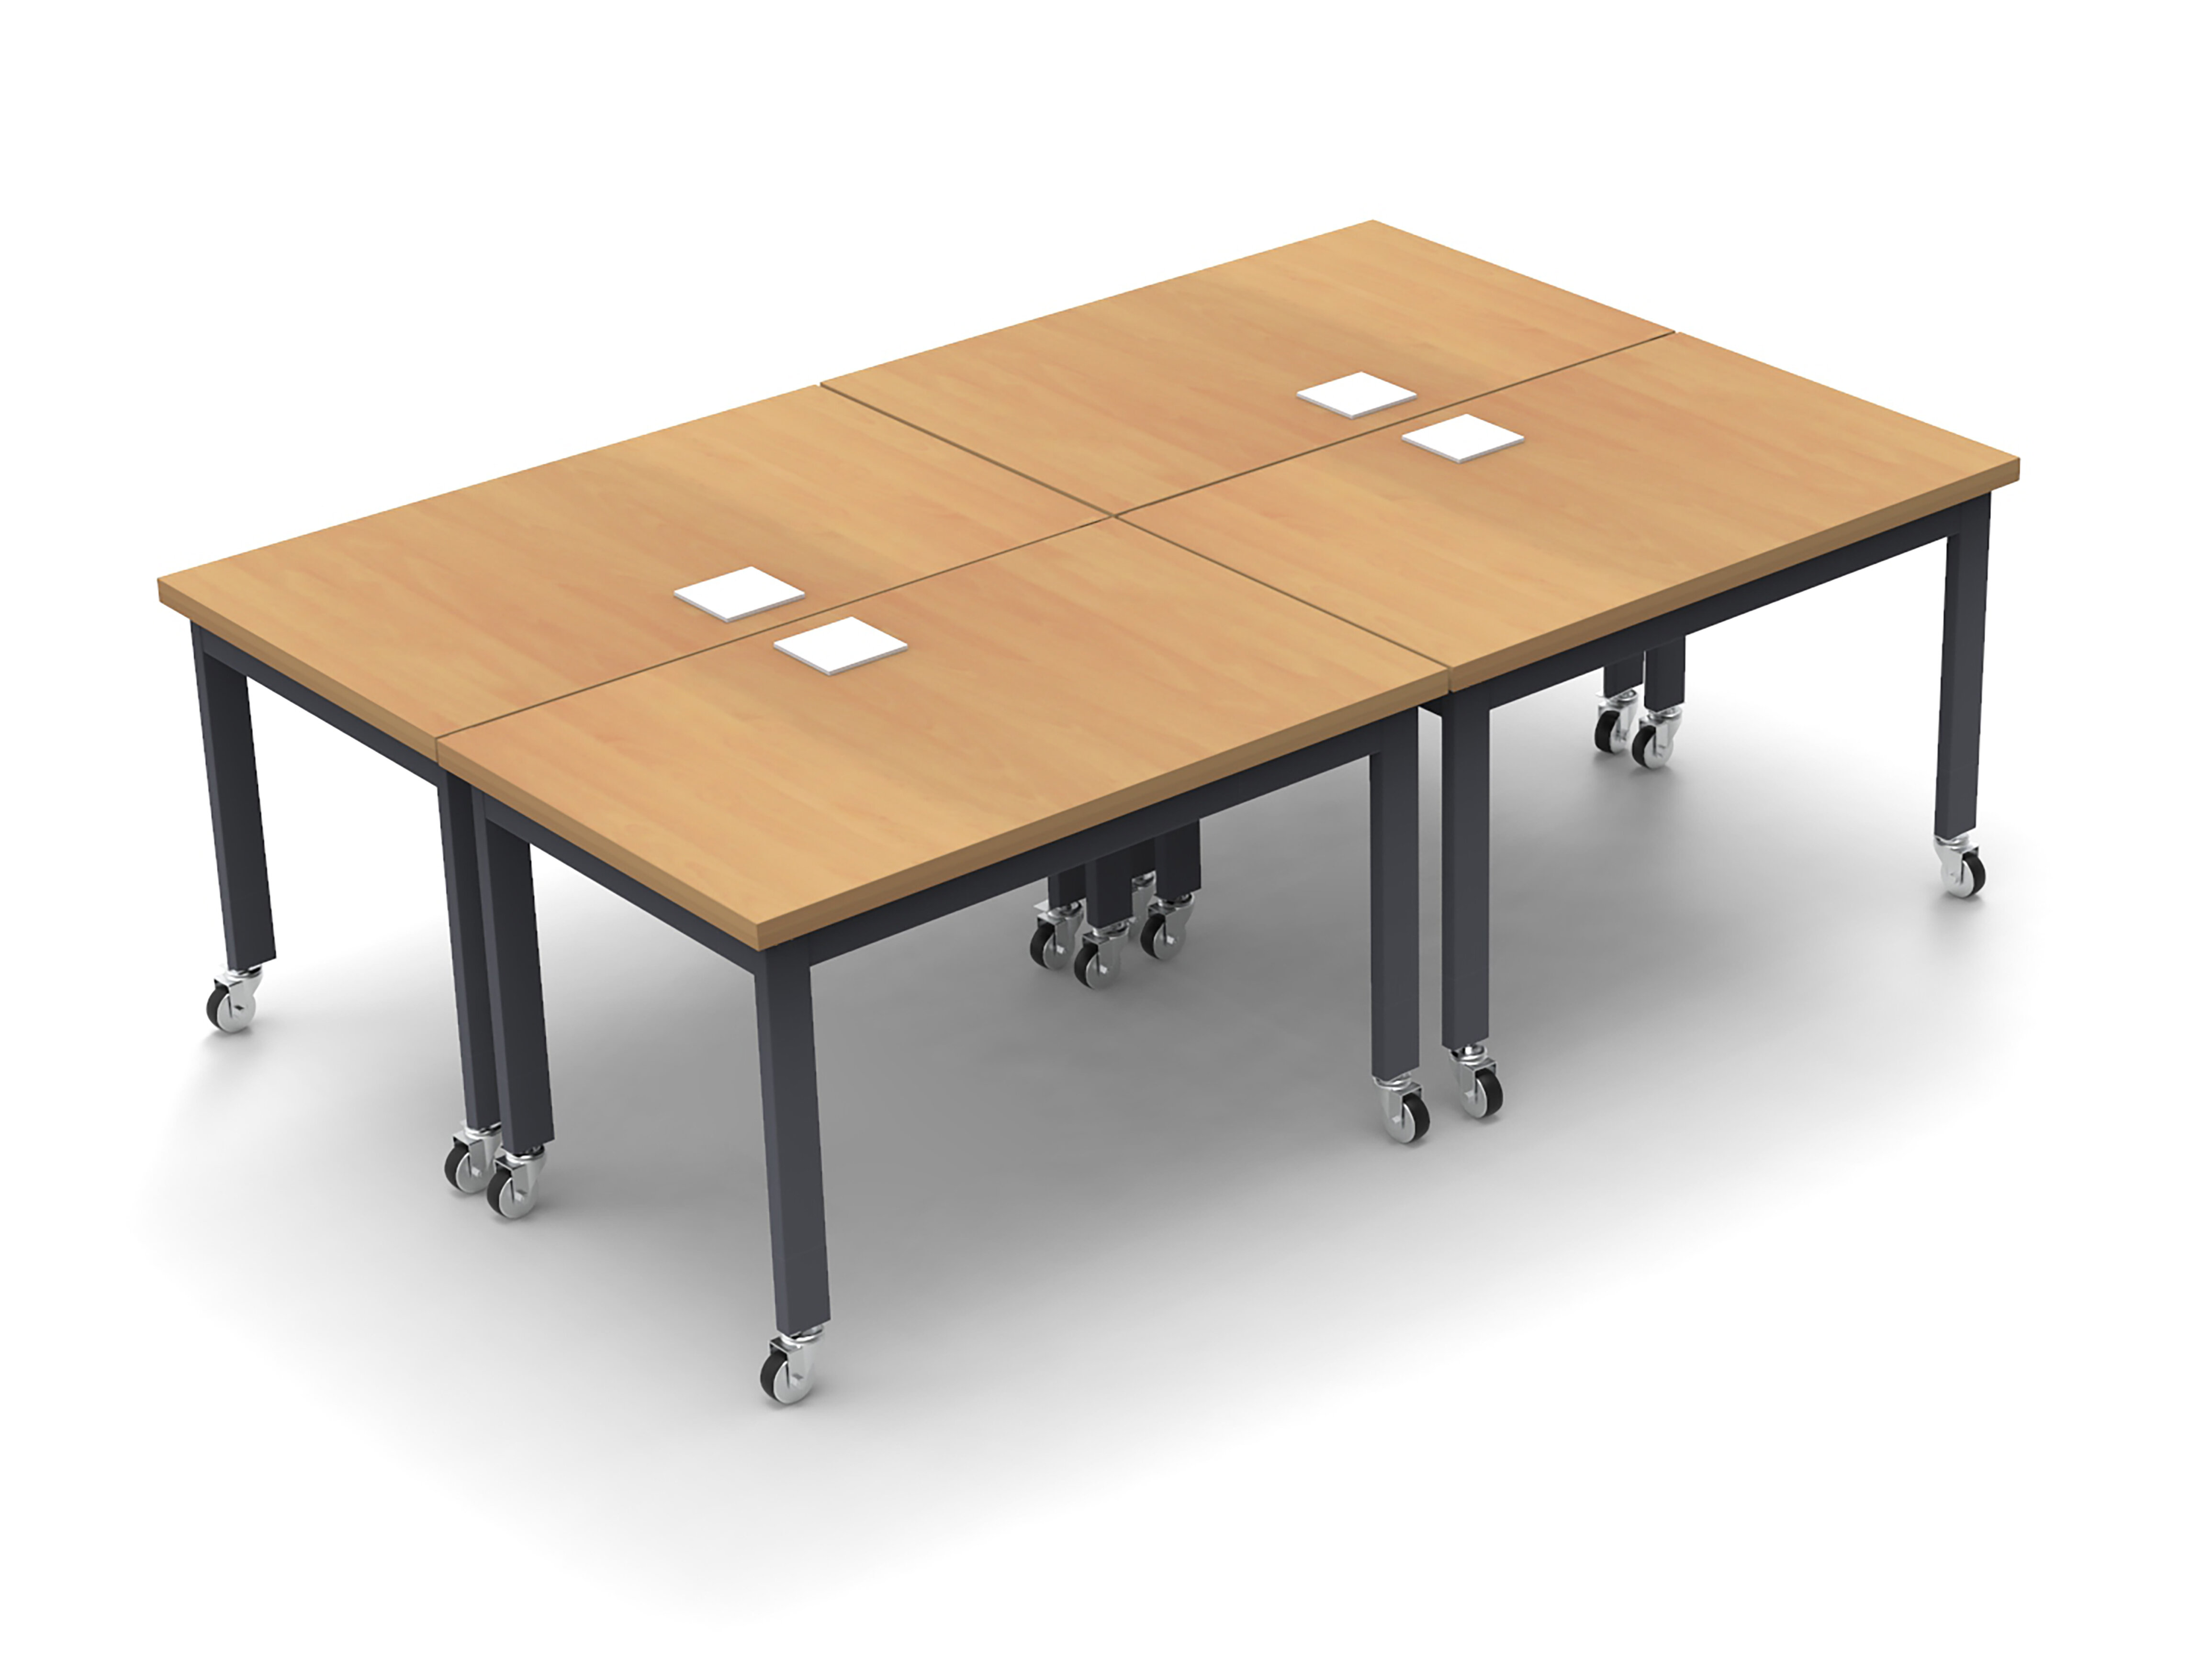 8' Long Meeting Room Table (8'W x 1' 6D x 2' 5H), #SMS-28-ST1896PX